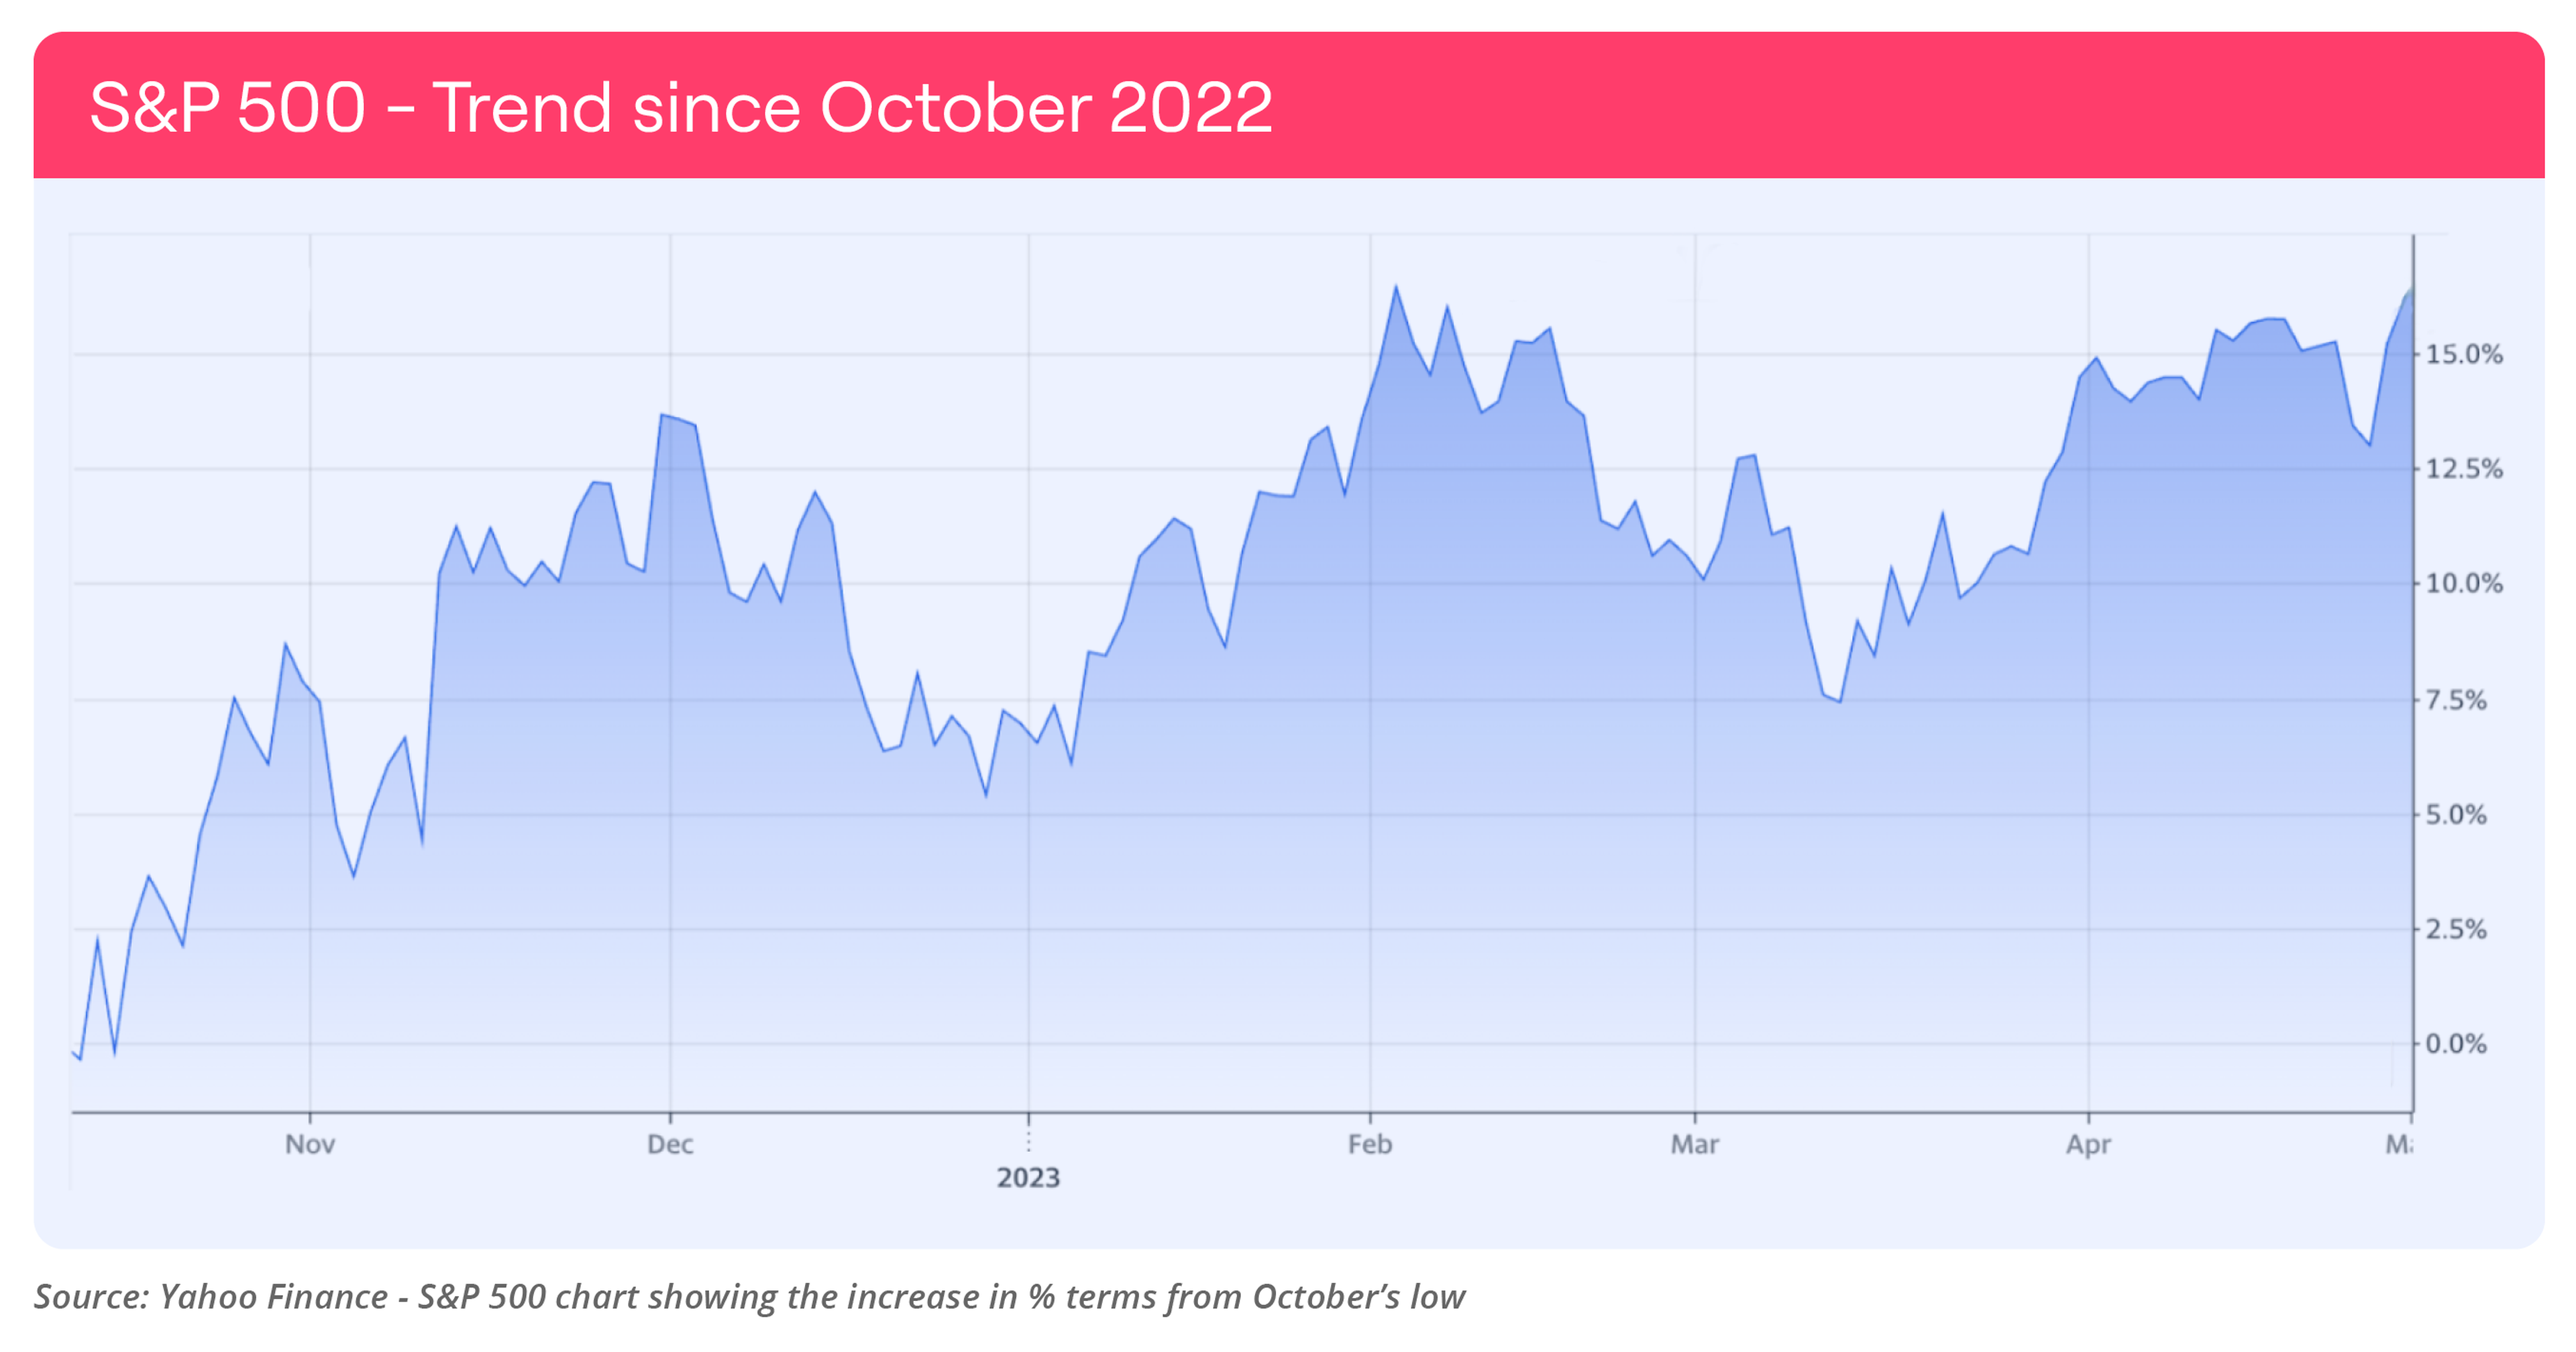 Line chart showing S&P500 performance between October 2022 and April 2023